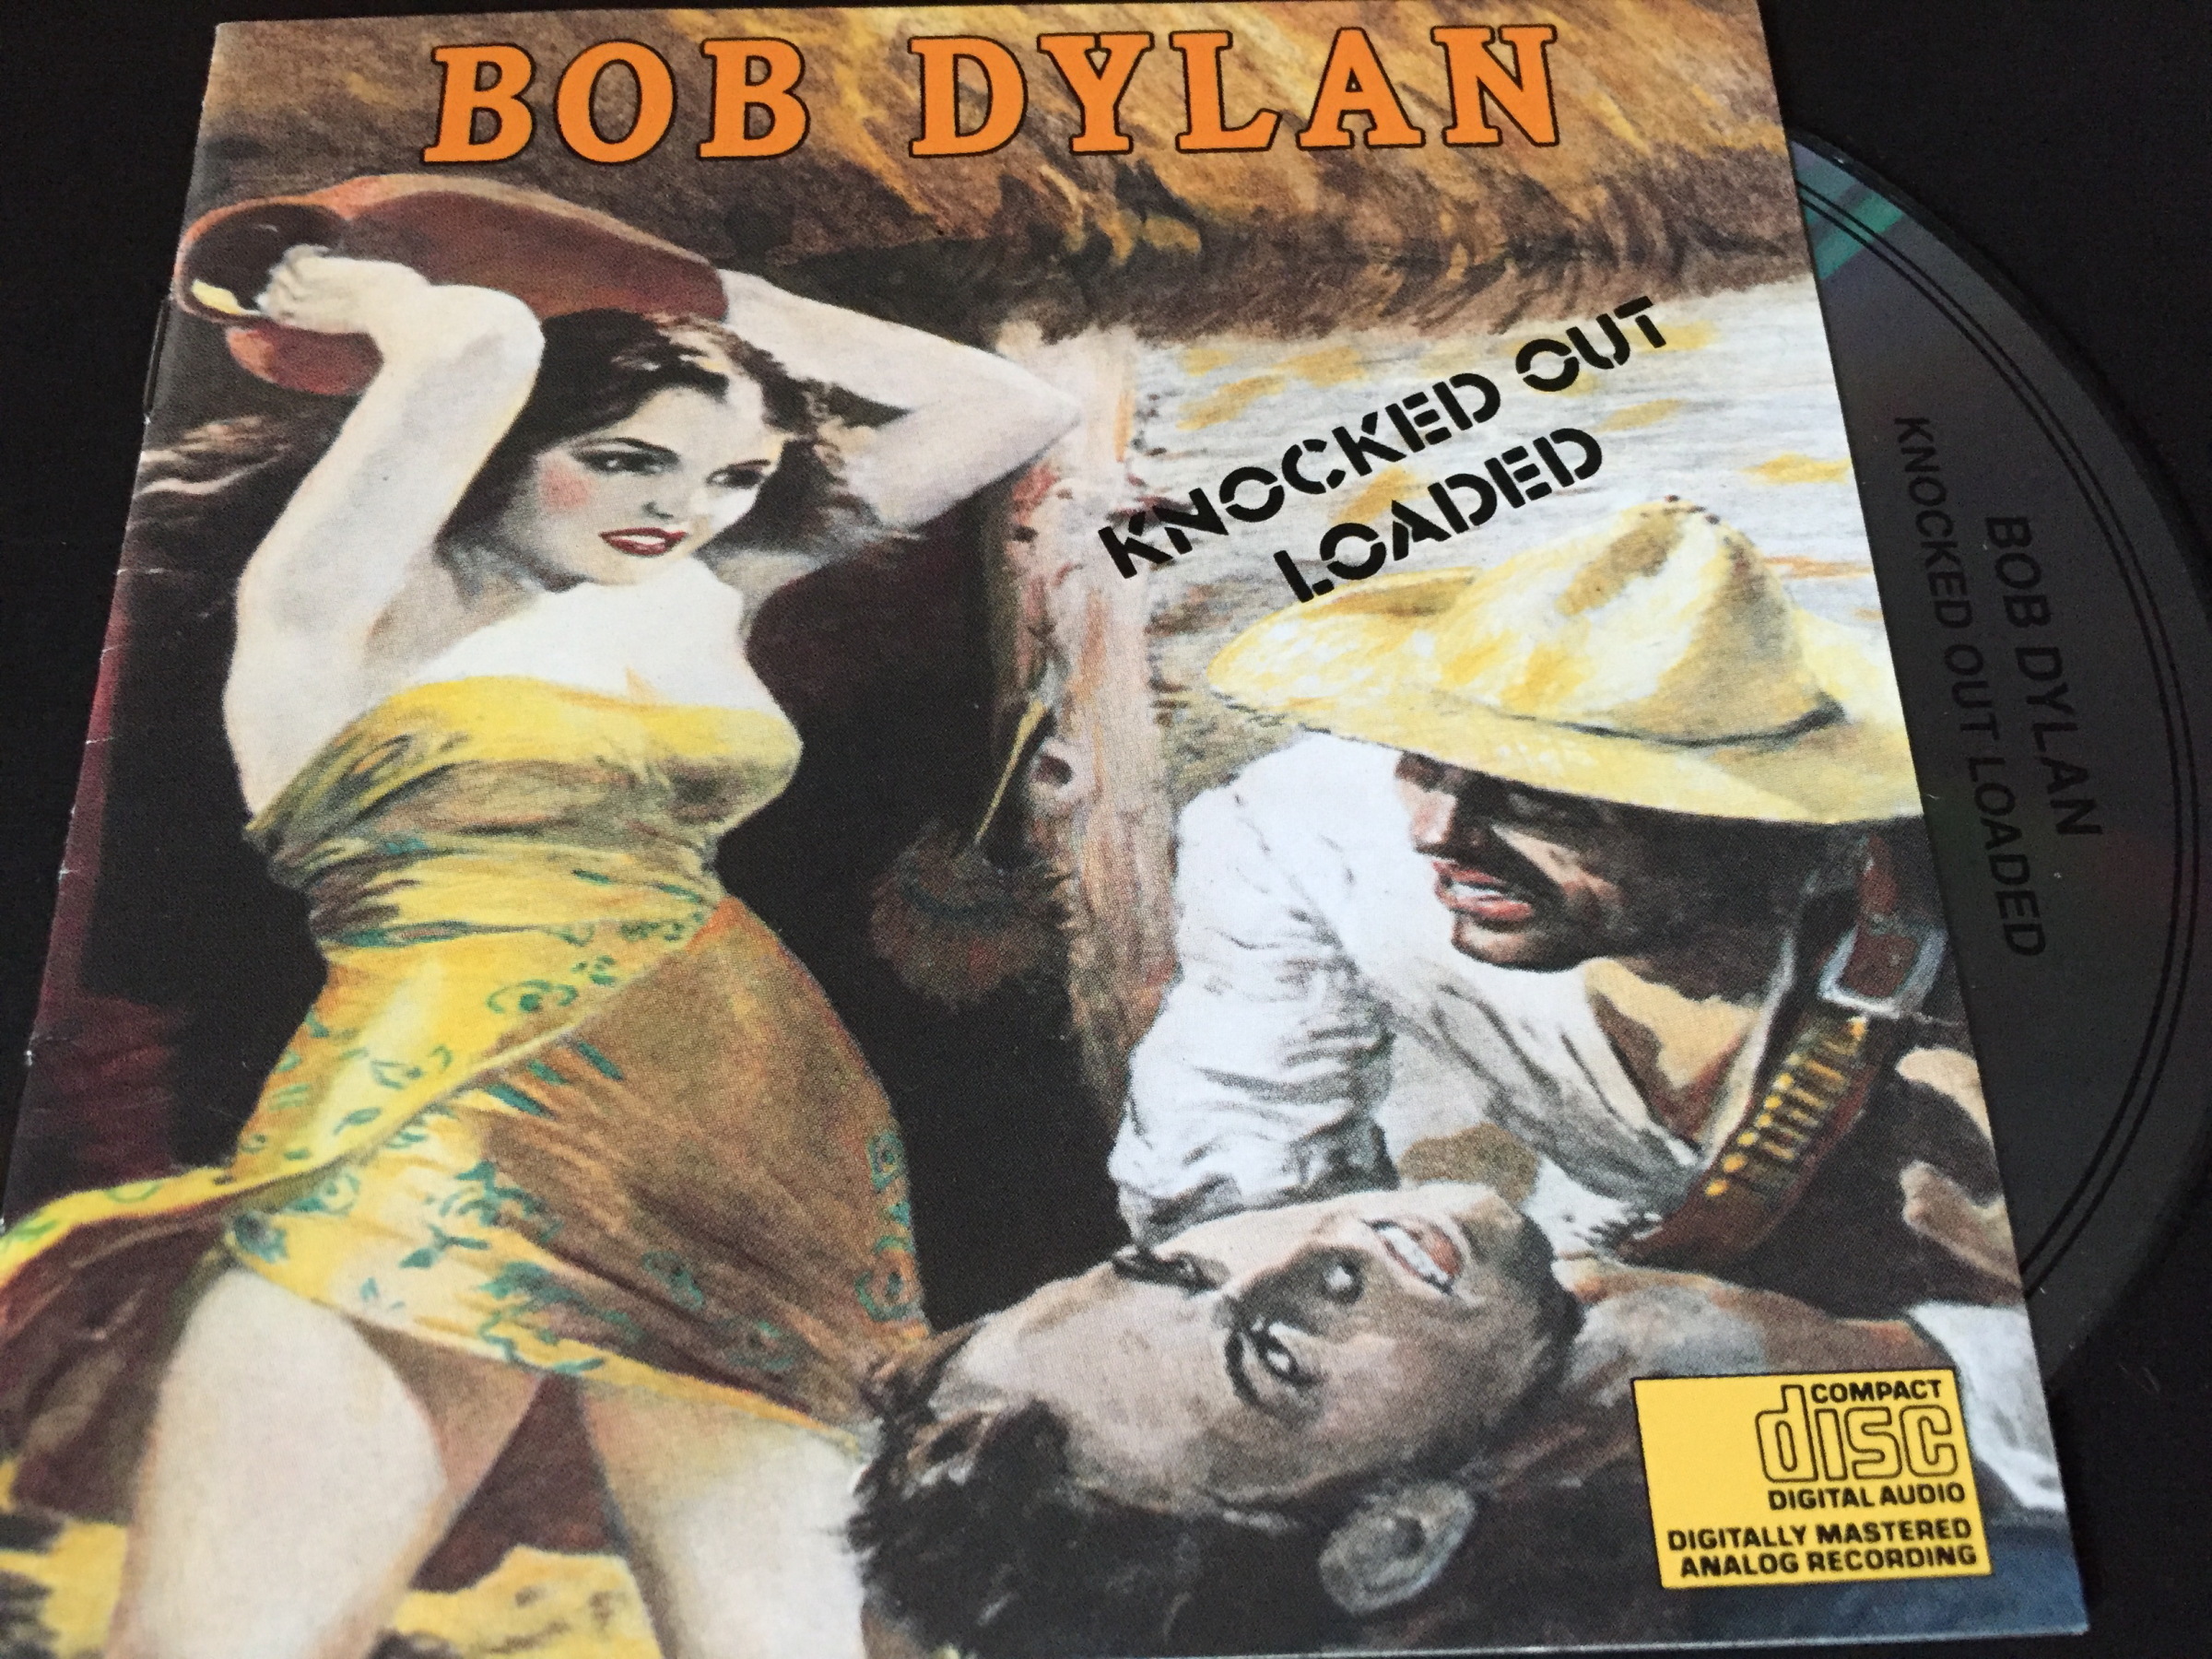 Bob Dylan / Knocked Out Loaded: 日々JAZZ的な生活